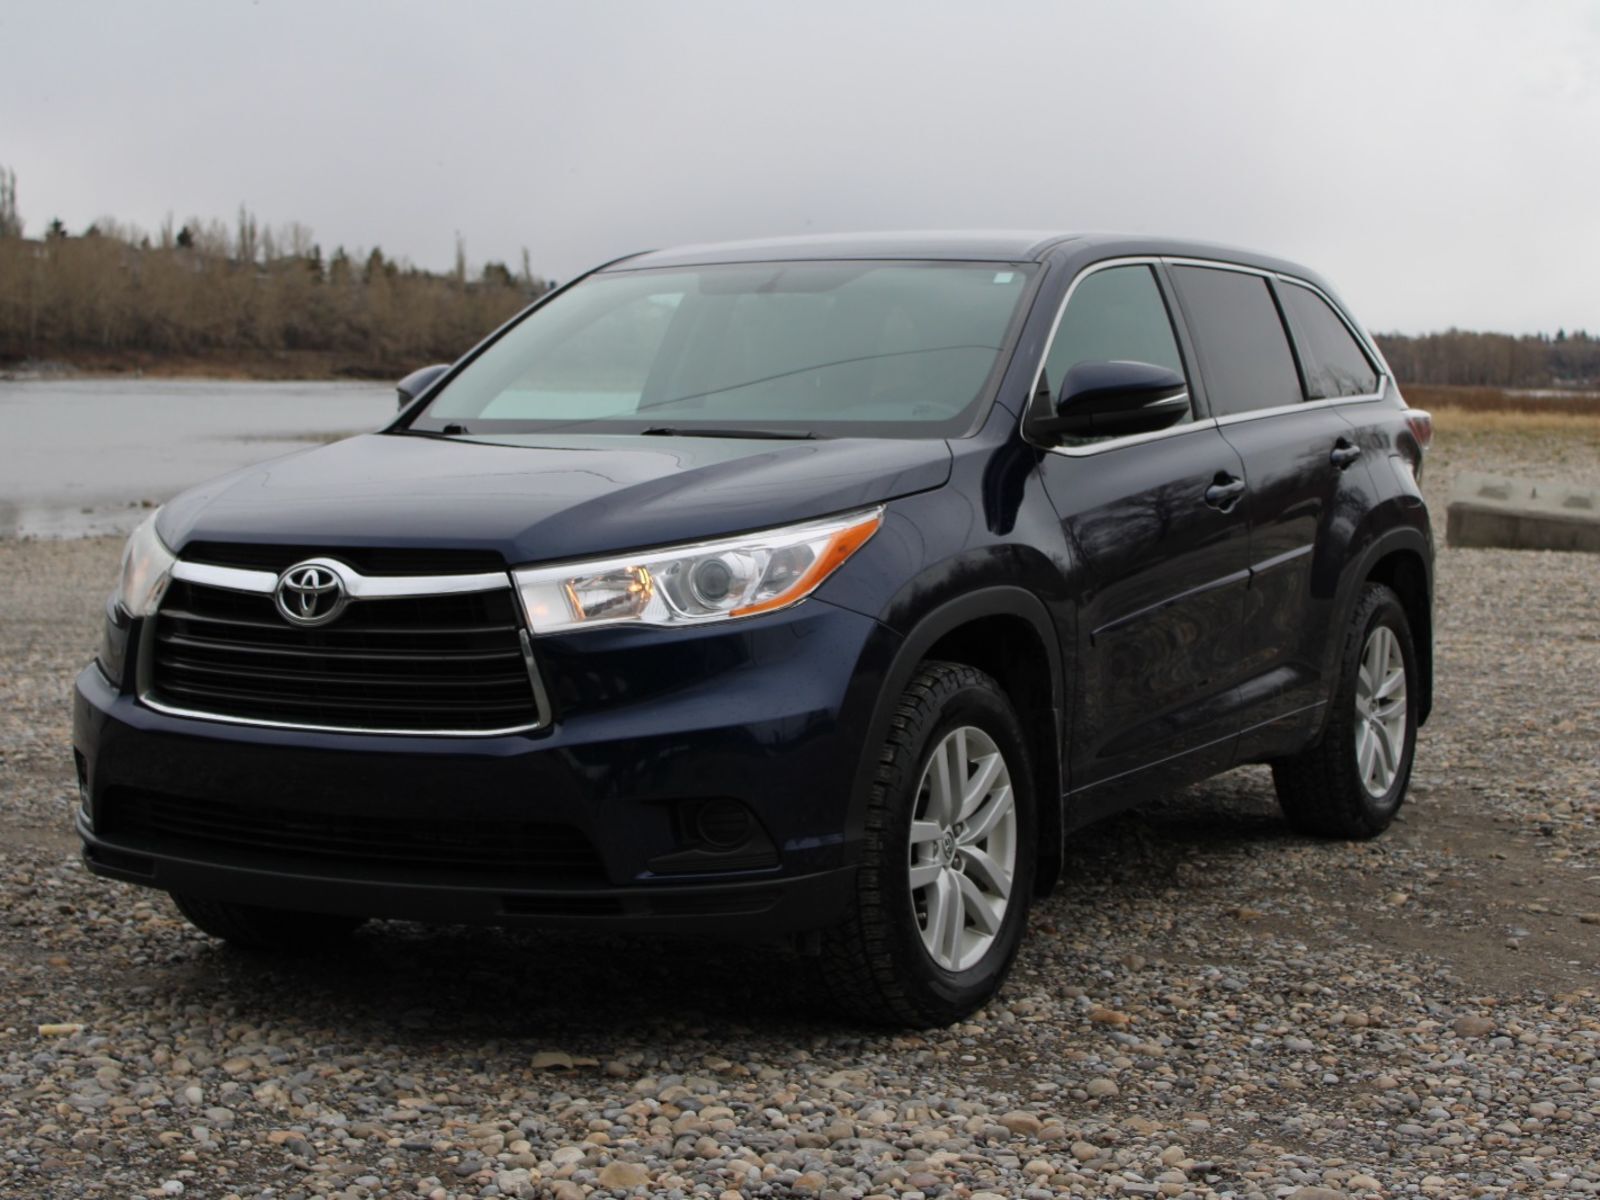 2015 Toyota Highlander NEW FRONT BRAKES - ONE OWNER/NO ACCIDENTS!!